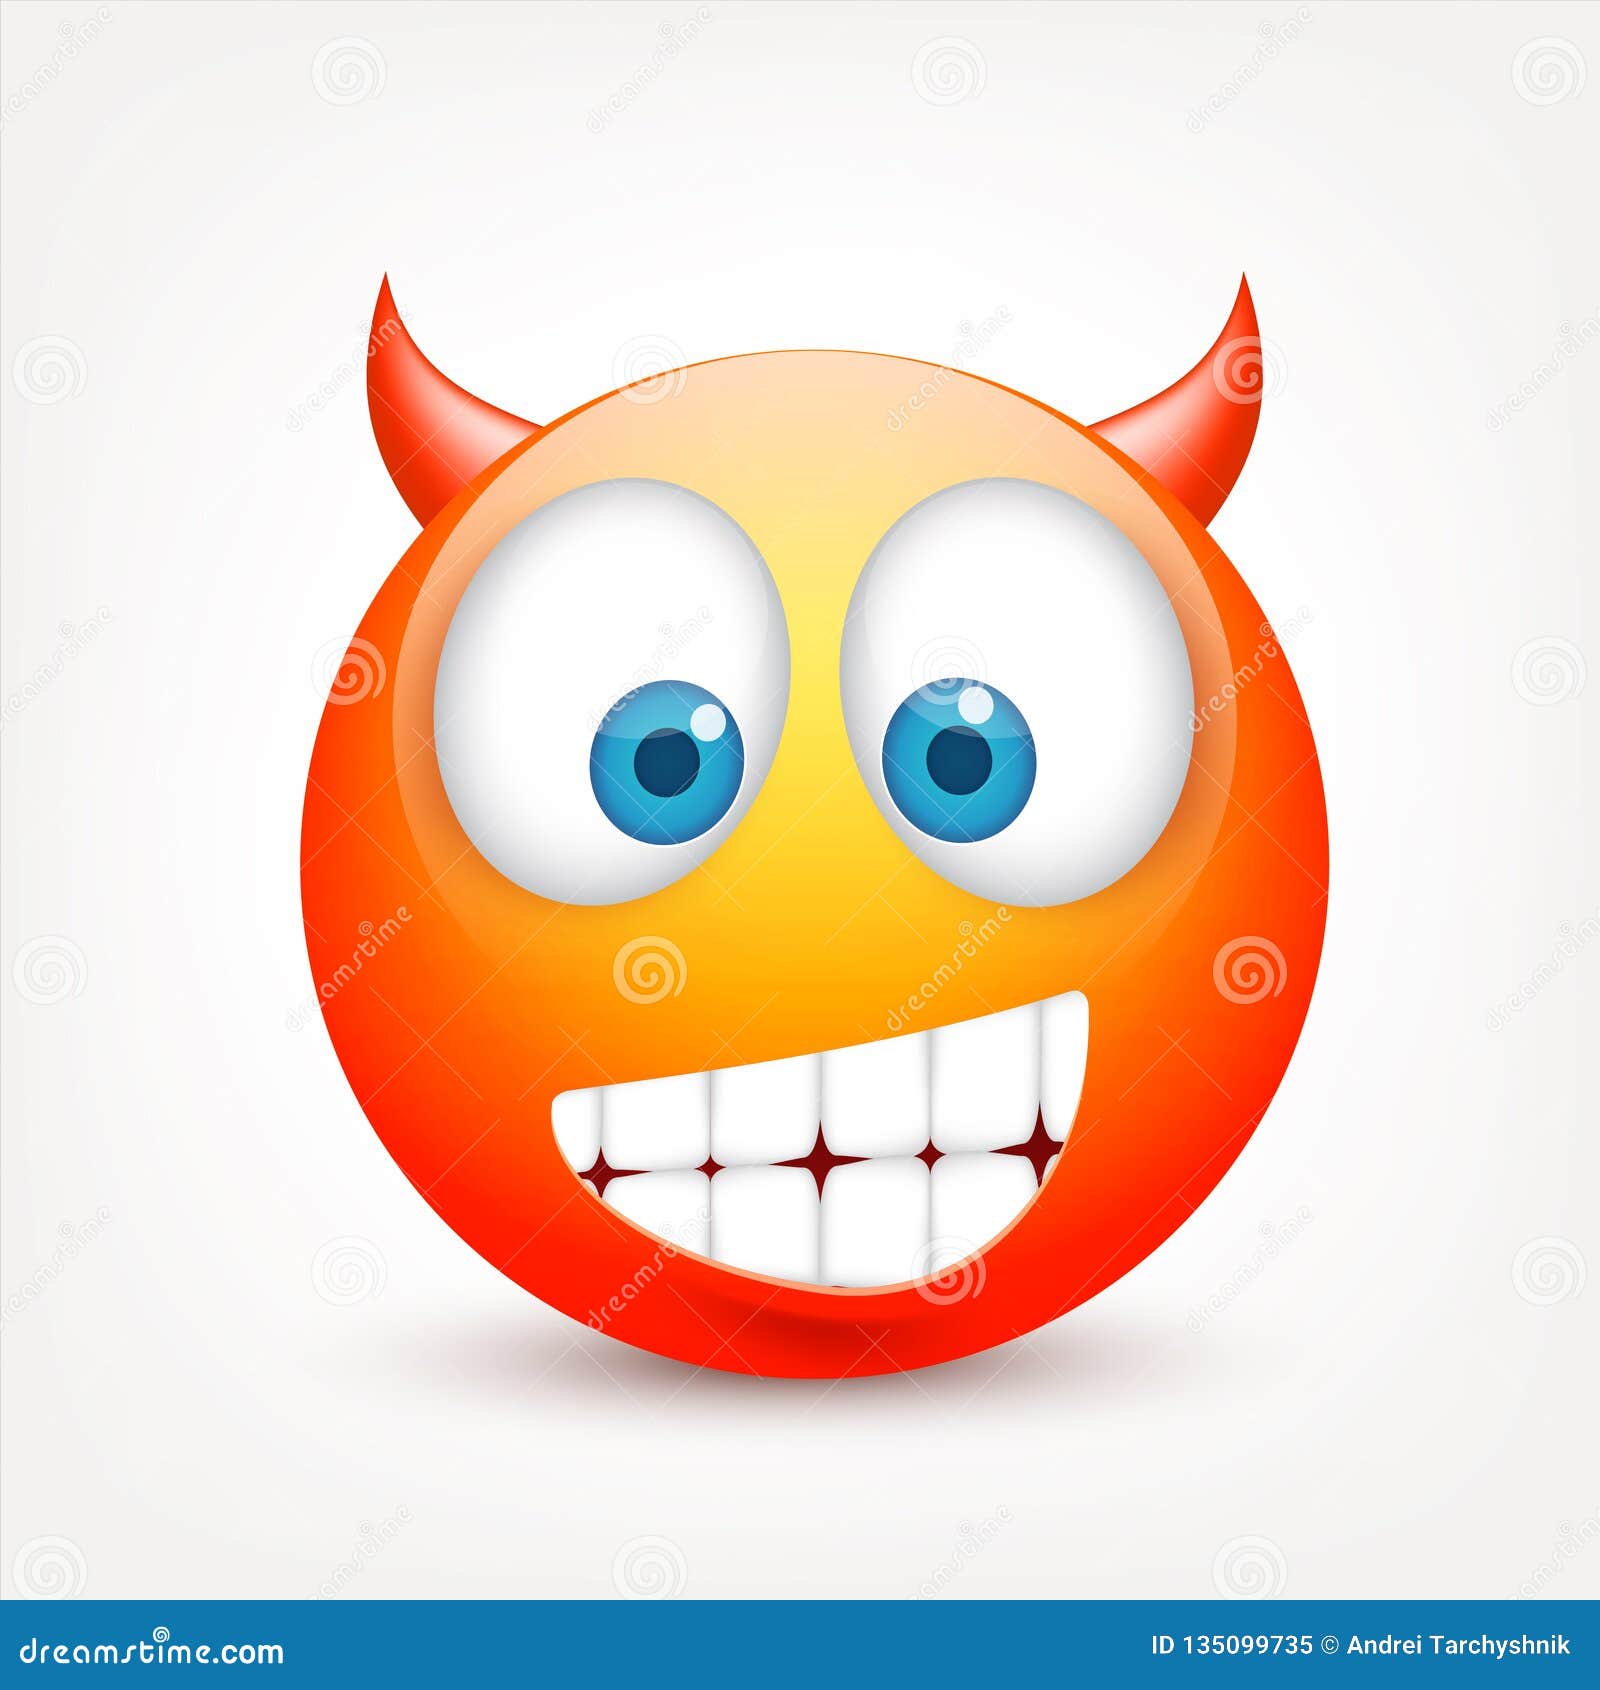 Smiley Red Face With Emotions Realistic Emoji Sad Or Happy Angry Emoticon Mood Cartoon Character Vector Illustration Stock Vector Illustration Of Cheerful Isolated